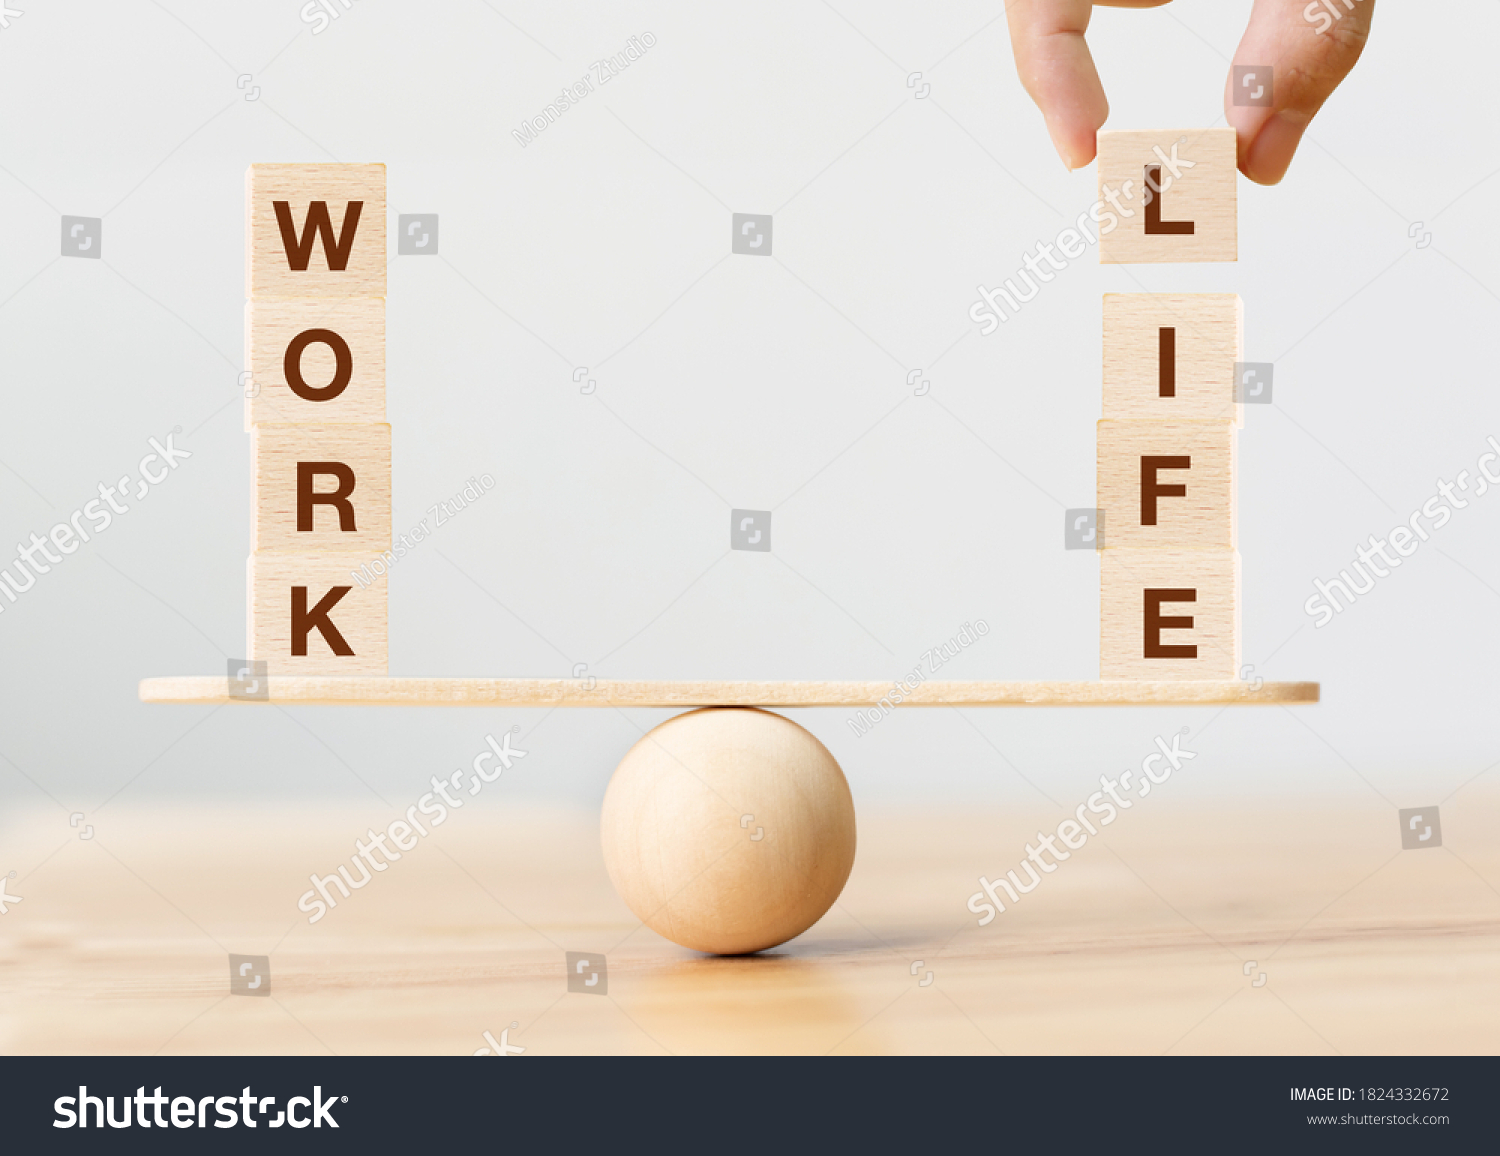 Work life balance concept. Wooden cube block with word WORK and LIFE on seesaw #1824332672